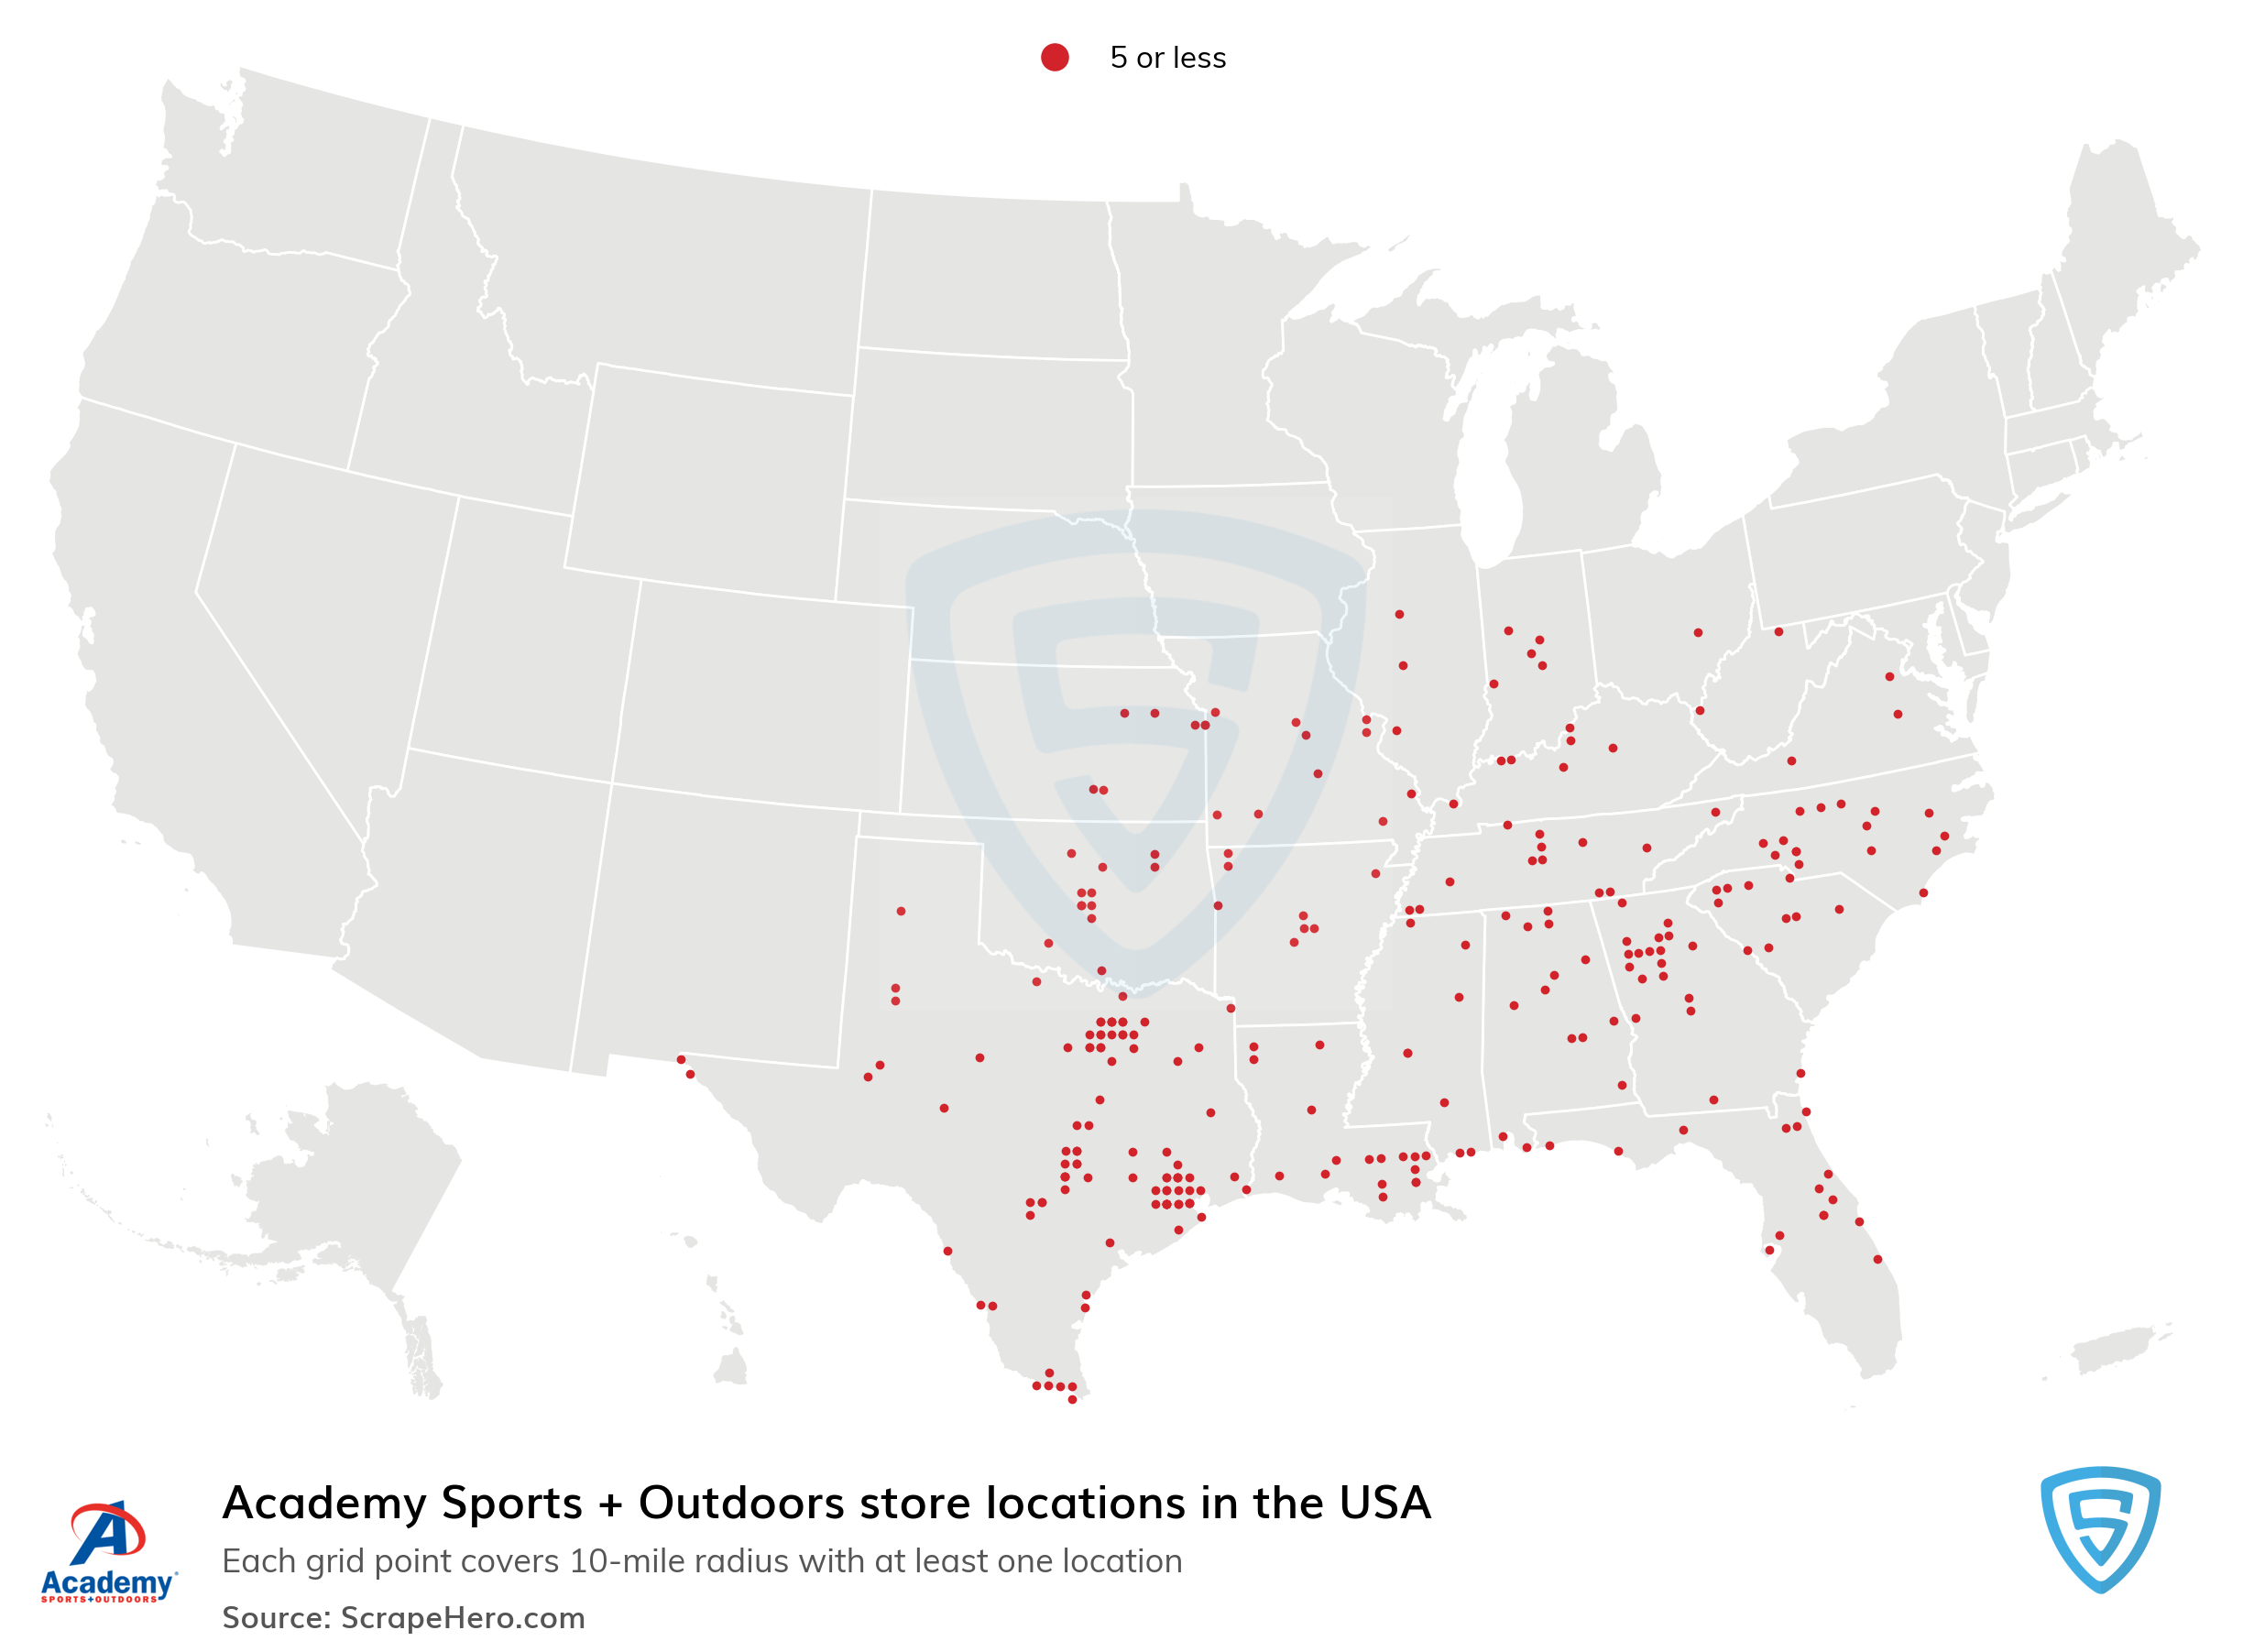 List of all Academy Sports + Outdoors store locations in the USA